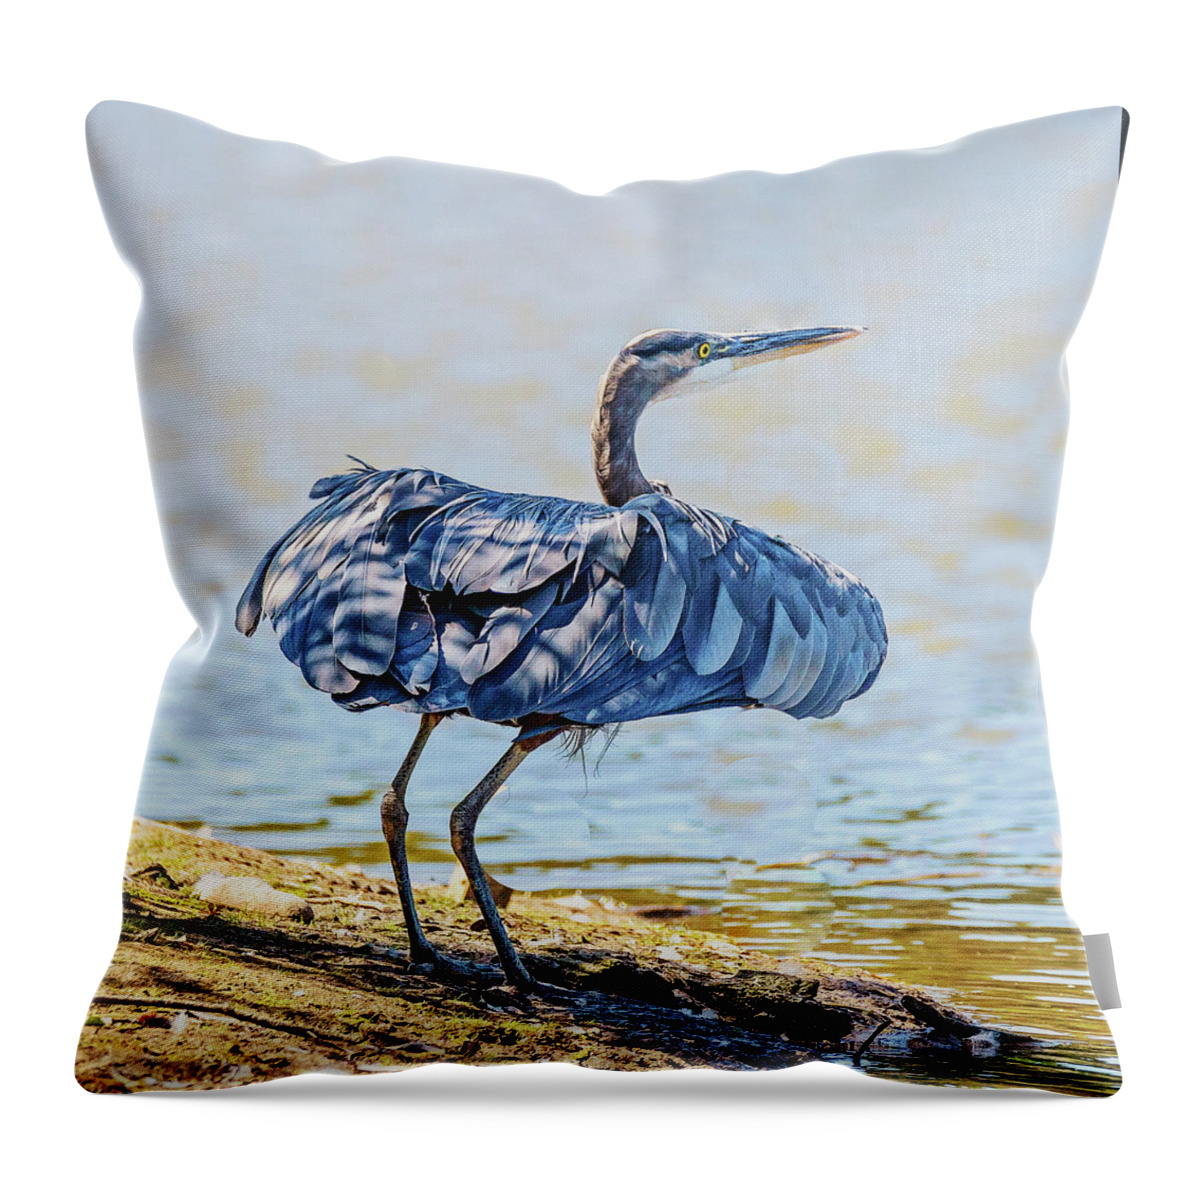 Heron Throw Pillow featuring the photograph Heron Puffing by Jerry Cahill